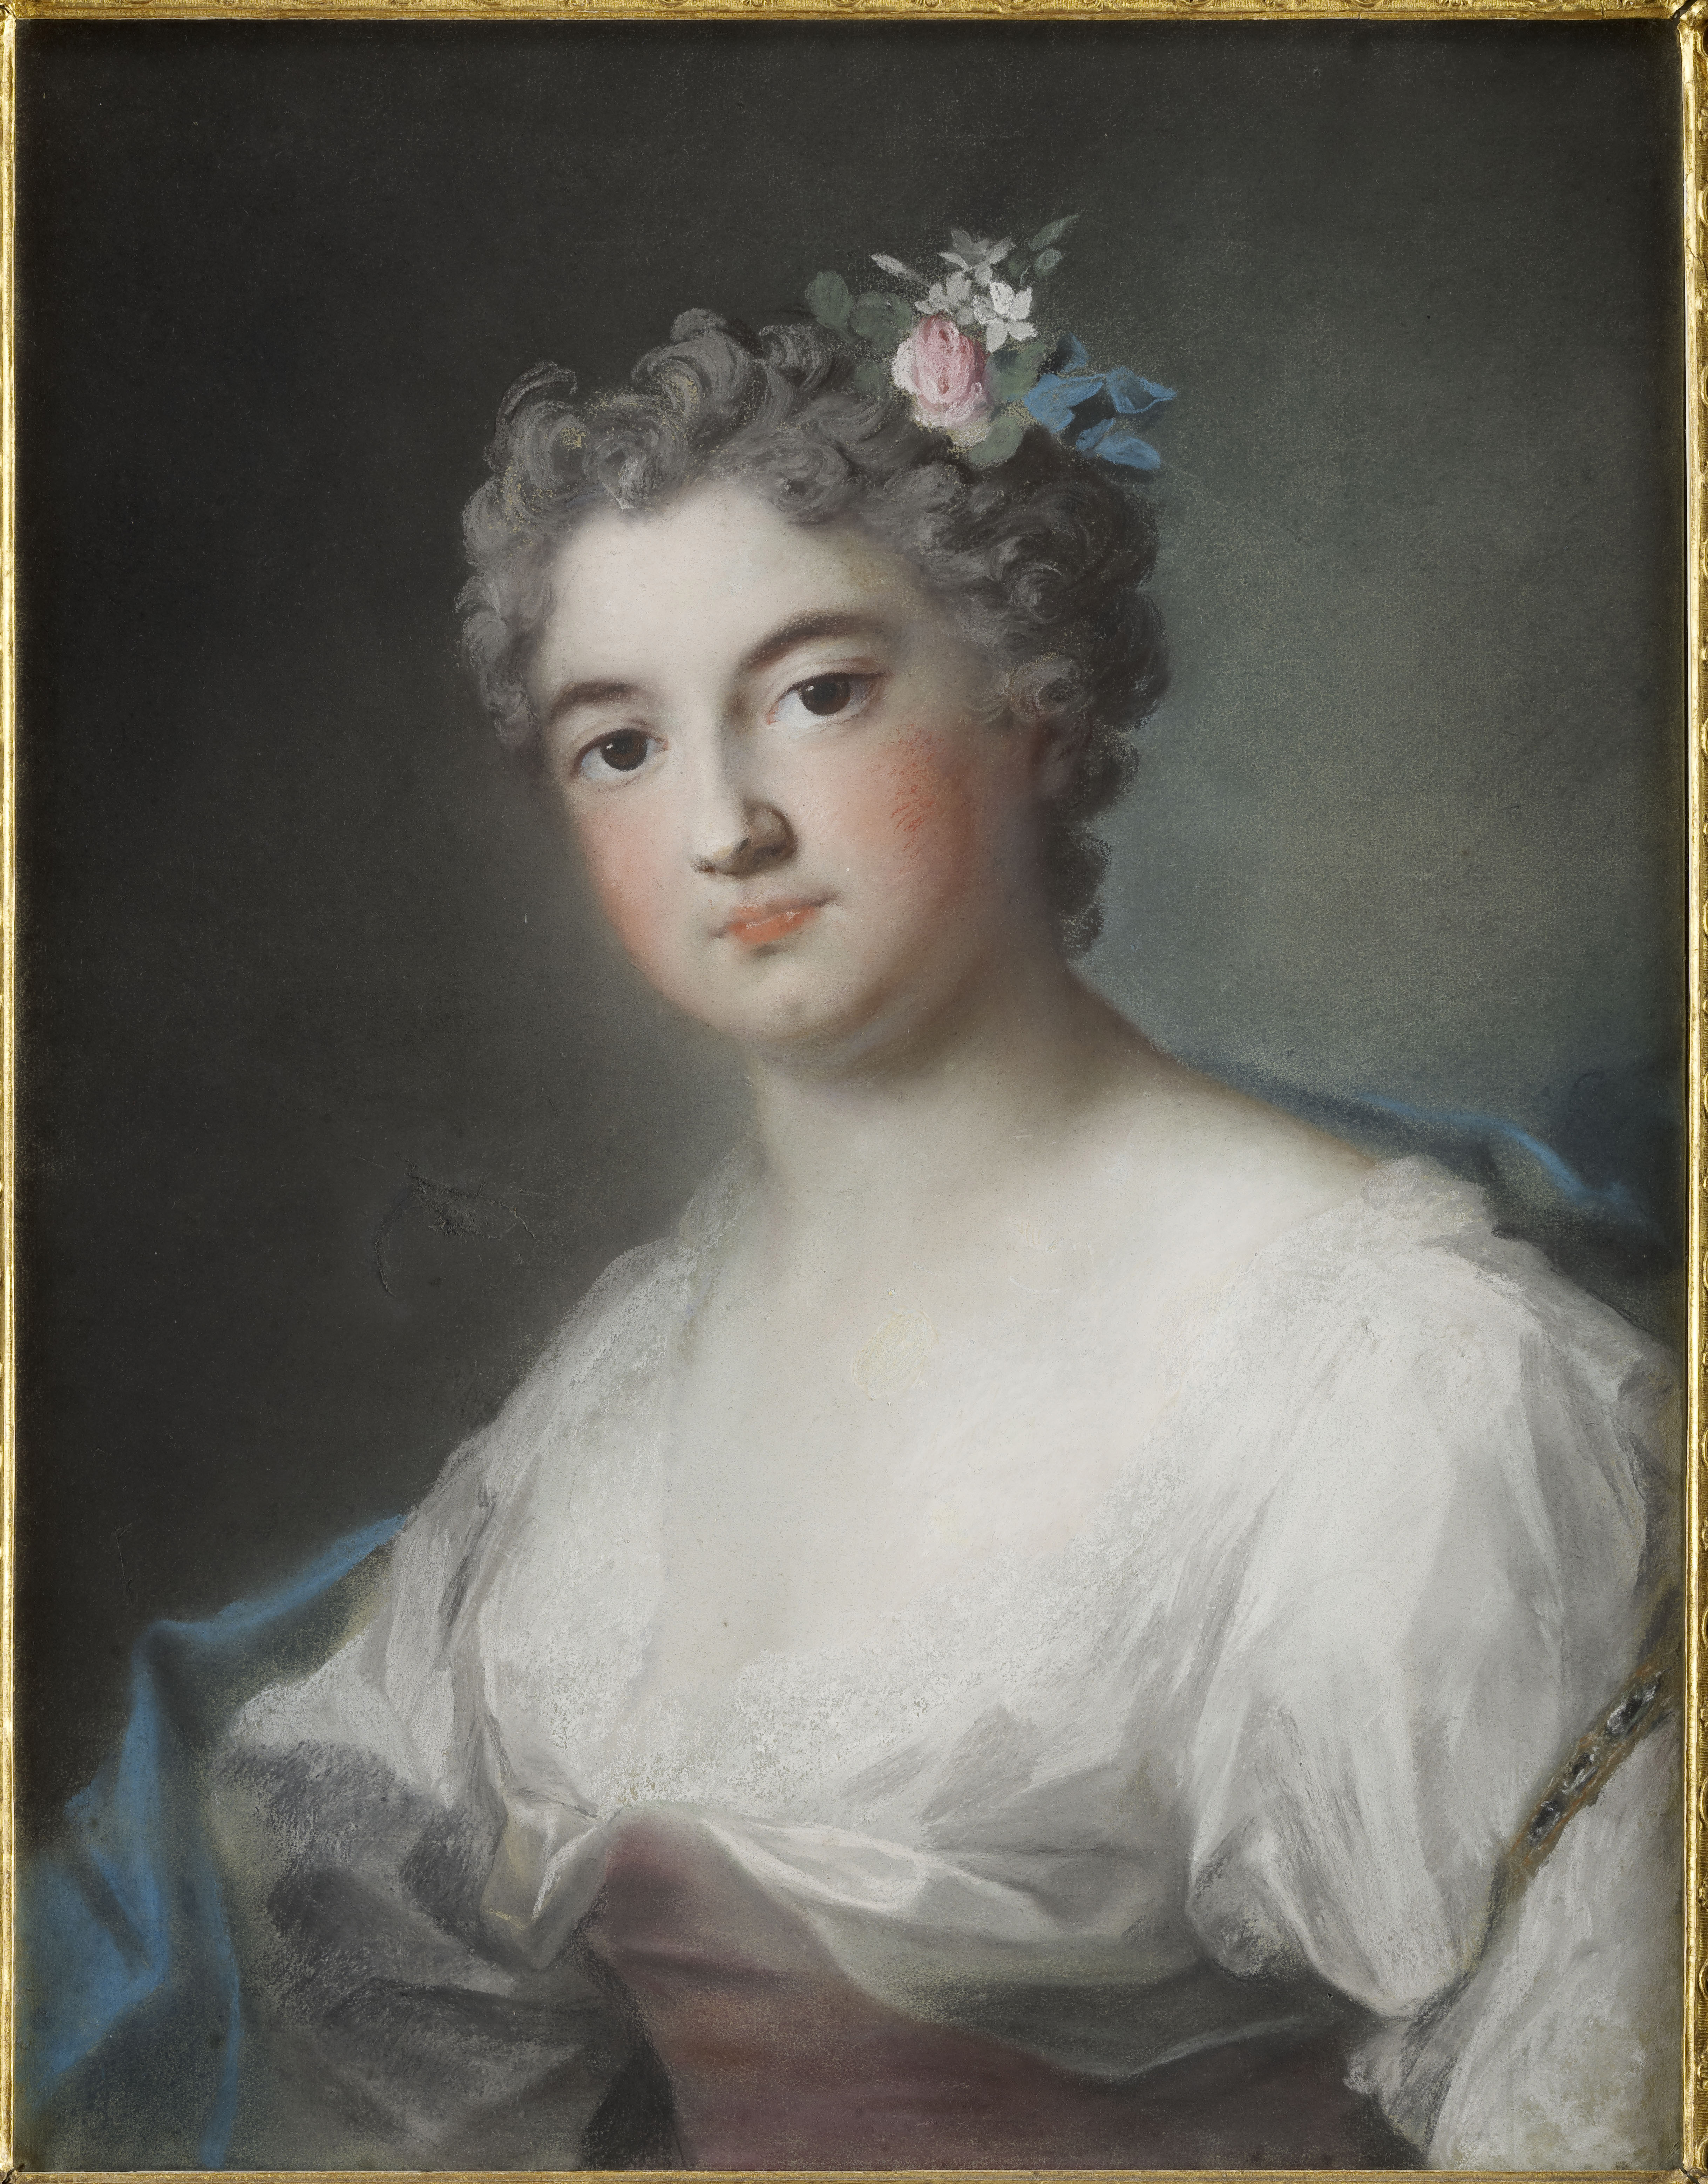 A half-length portrait of a young woman with gray hair, wearing a white and pink gown with a blue shawl around her shoulders. Her cheeks are heavily rouged, and she has flowers in her hair. She looks at the viewer directly with a serious expression. 